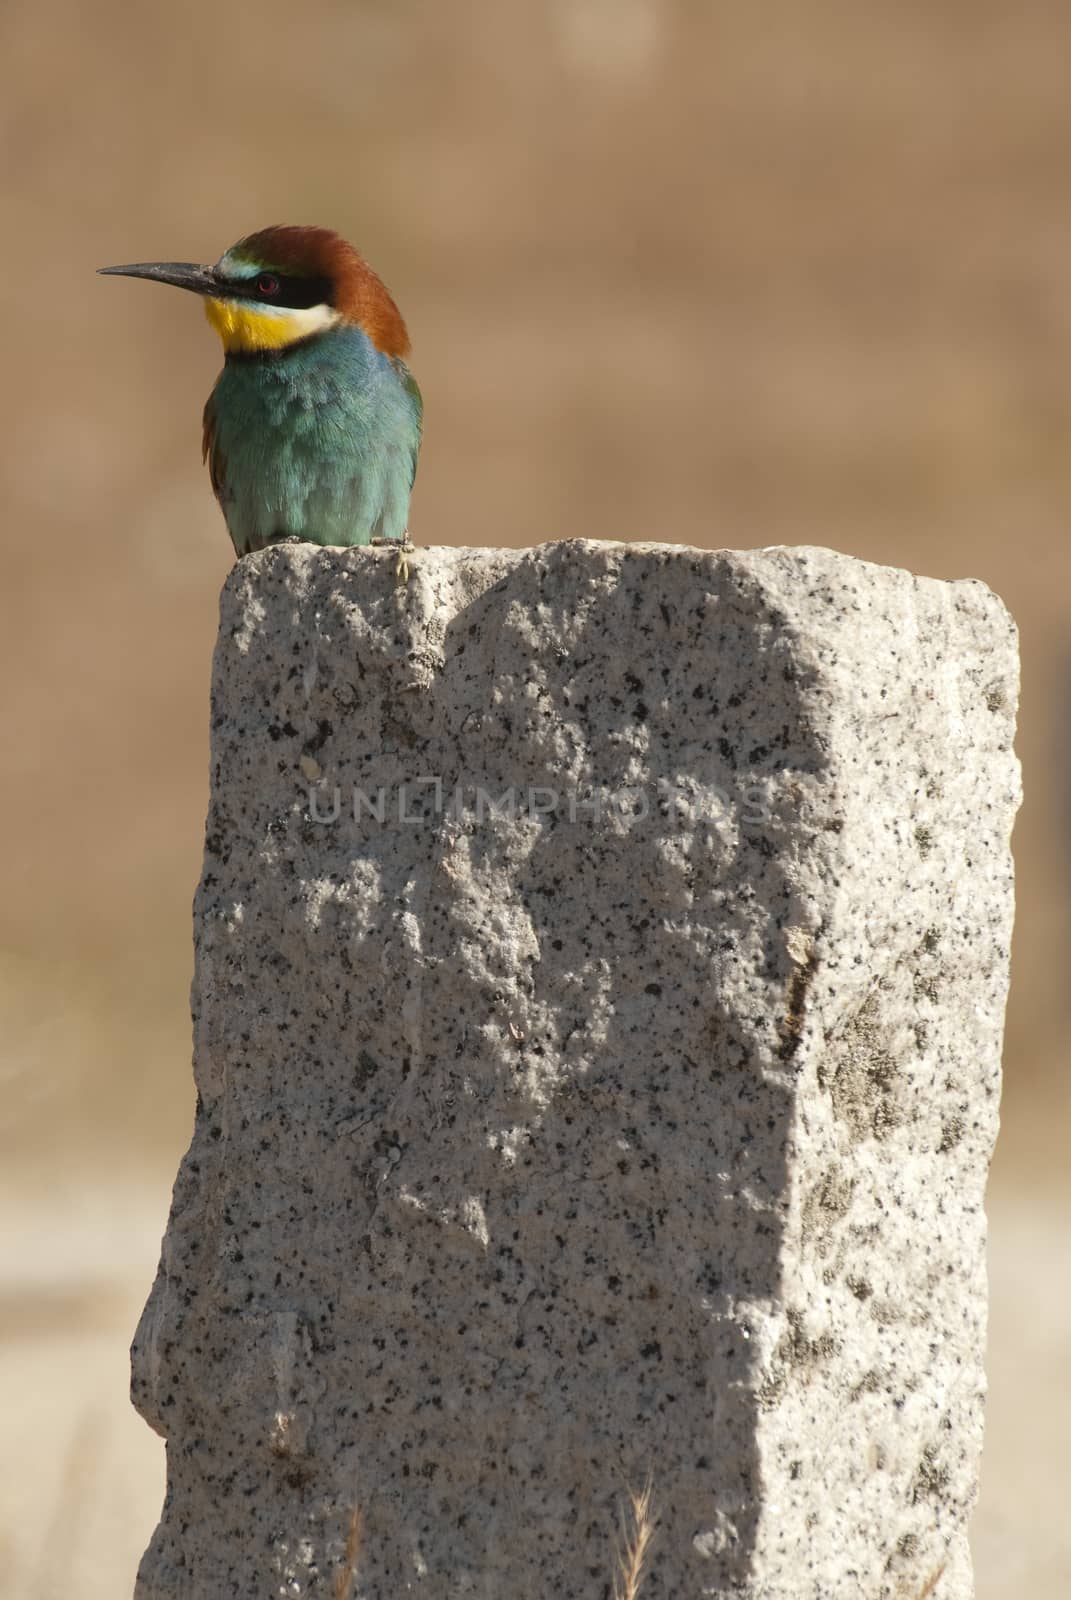 European bee-eater (Merops apiaster), perched on a rock  by jalonsohu@gmail.com